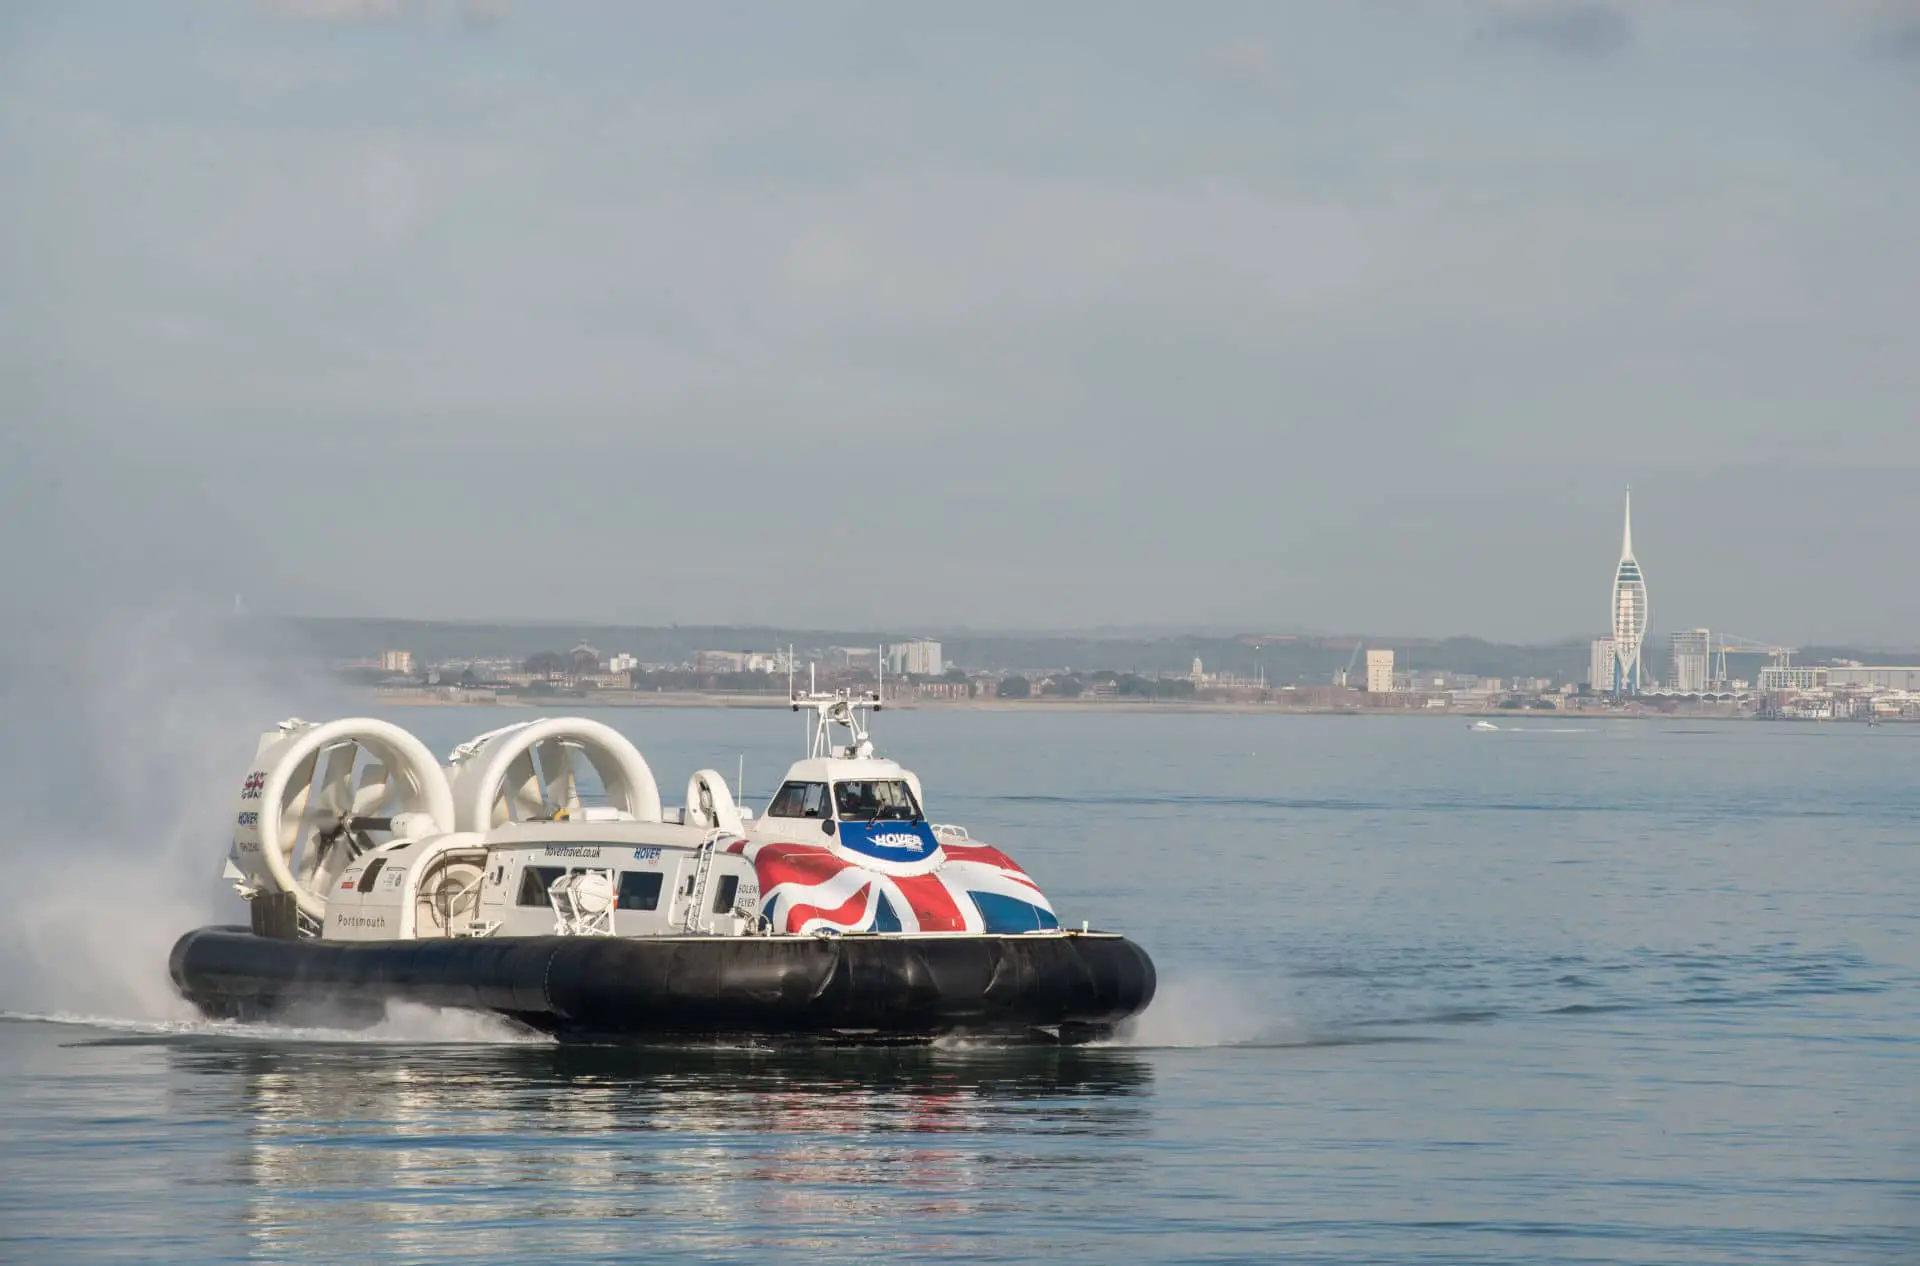 The Hovercraft on the water with Spinnaker Tower in the background